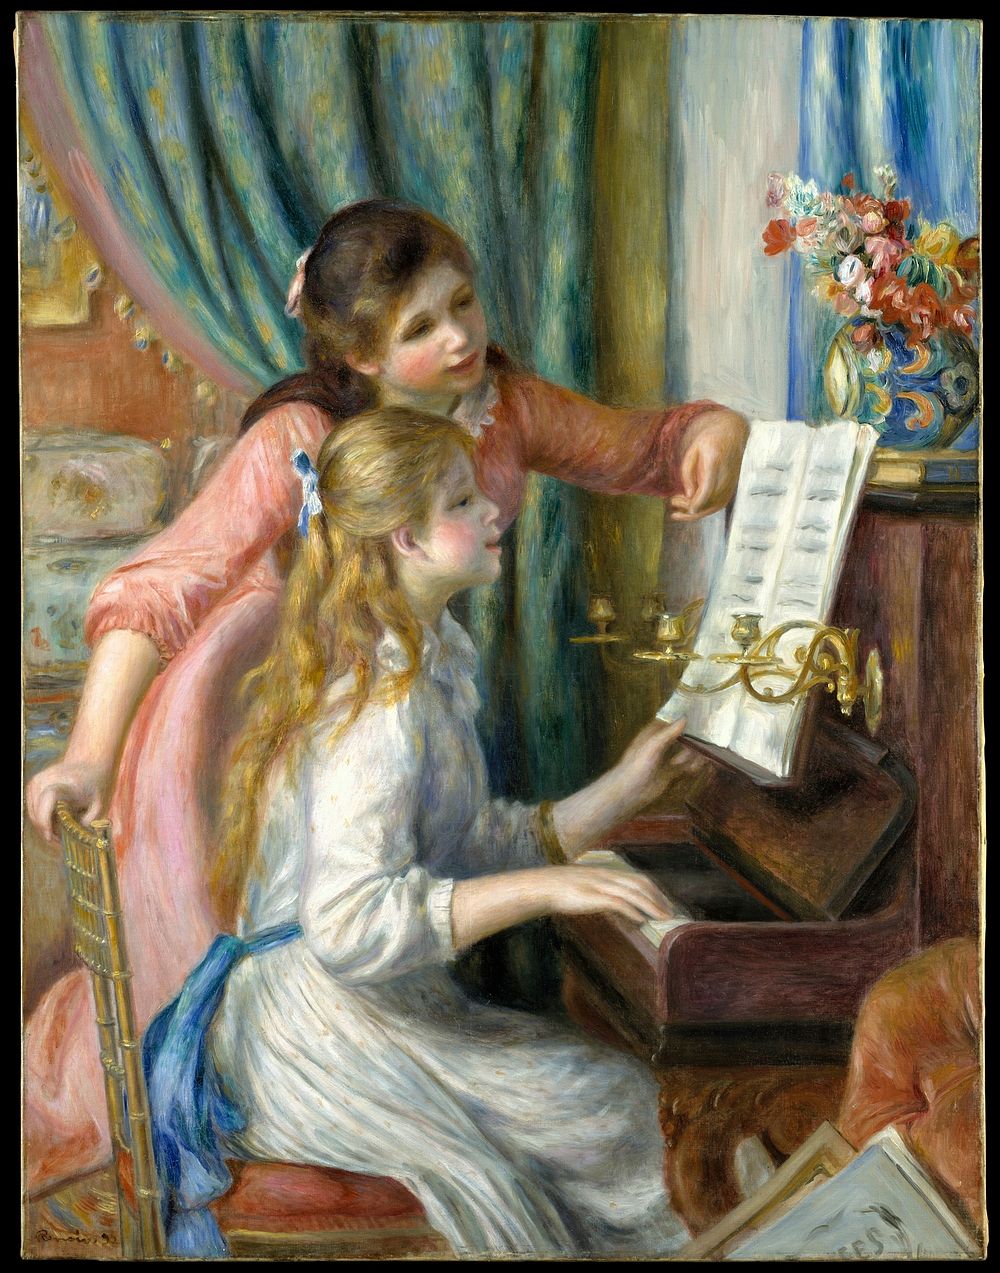 Pierre-Auguste Renoir's Two Young Girls at the Piano